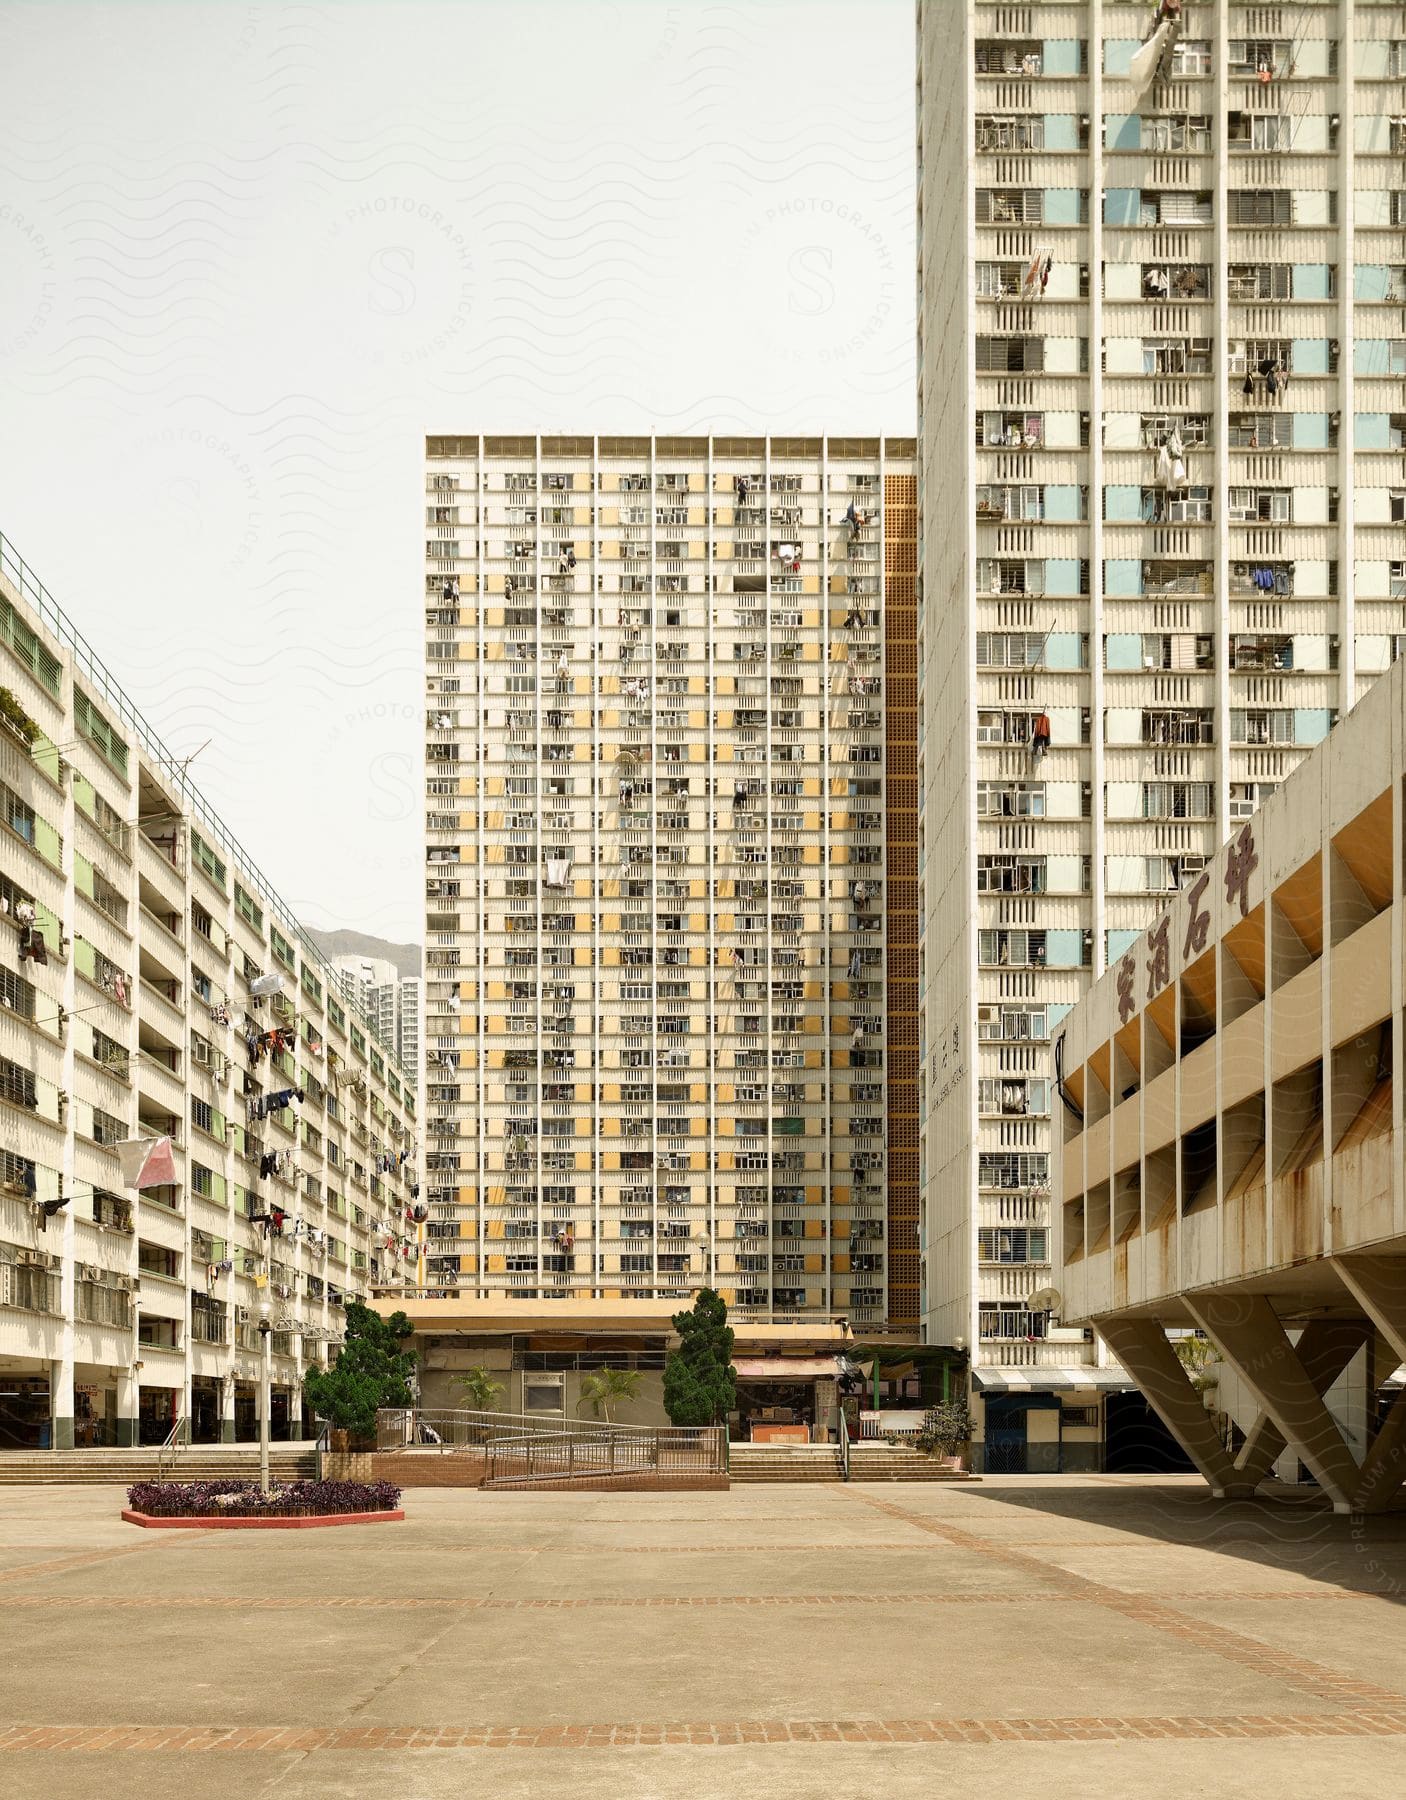 High rise residential buildings in a city